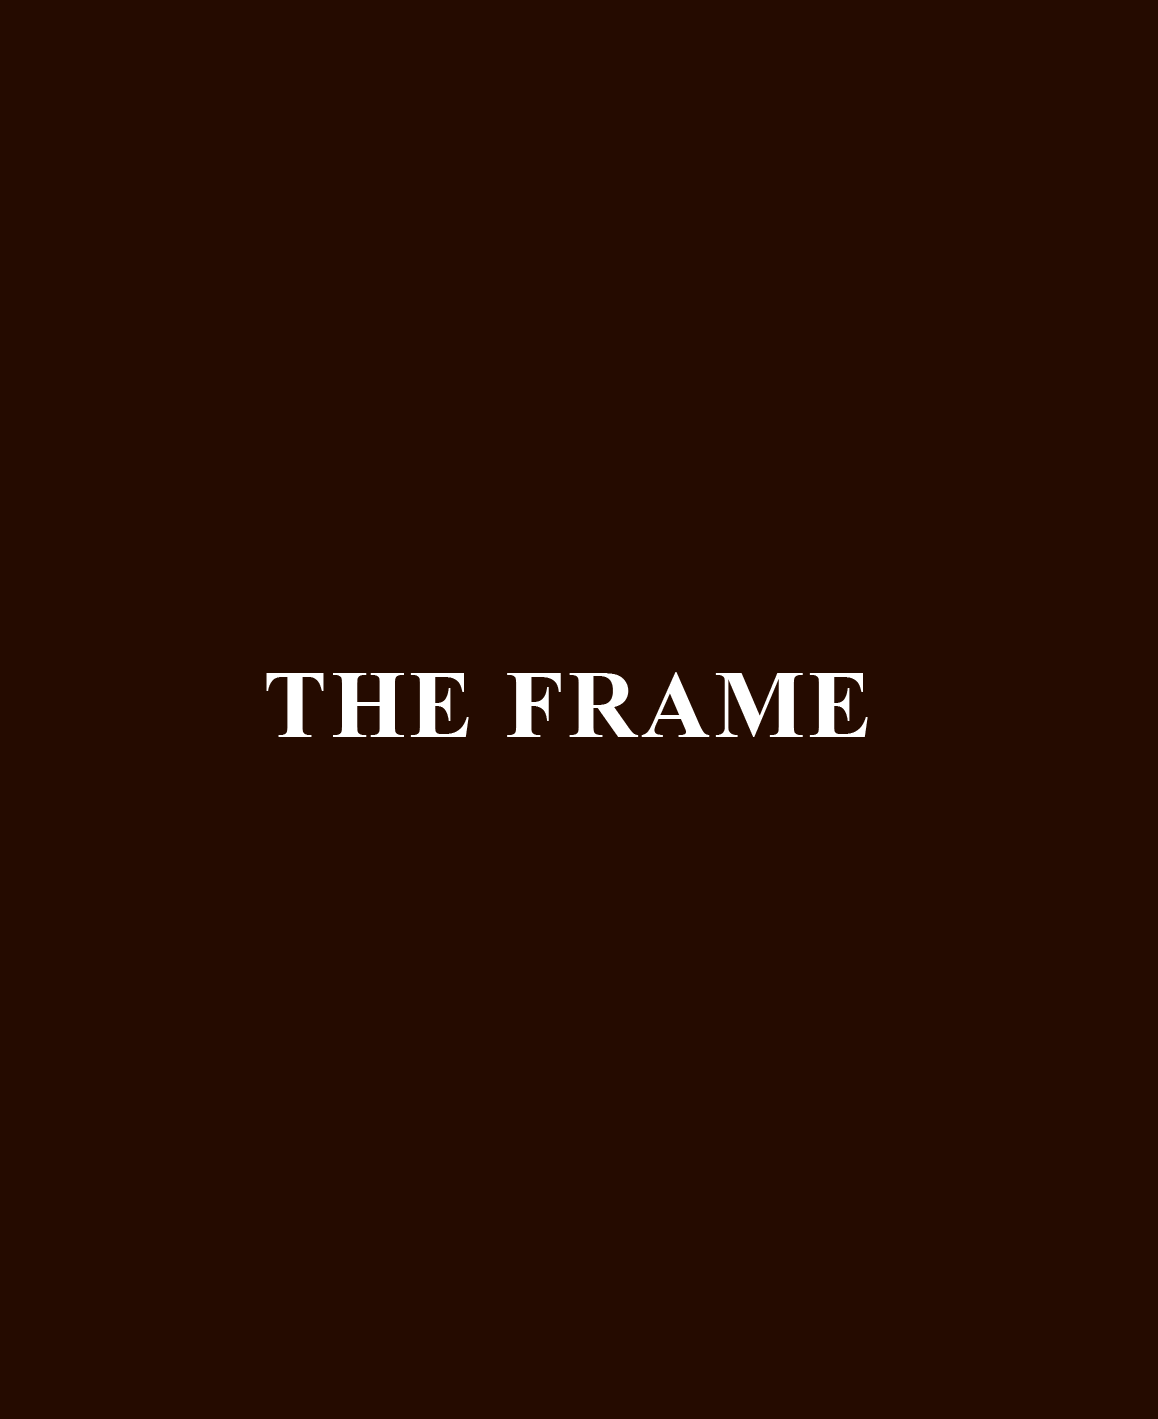 THE FRAME<br>JH Engström<br>Special Edition